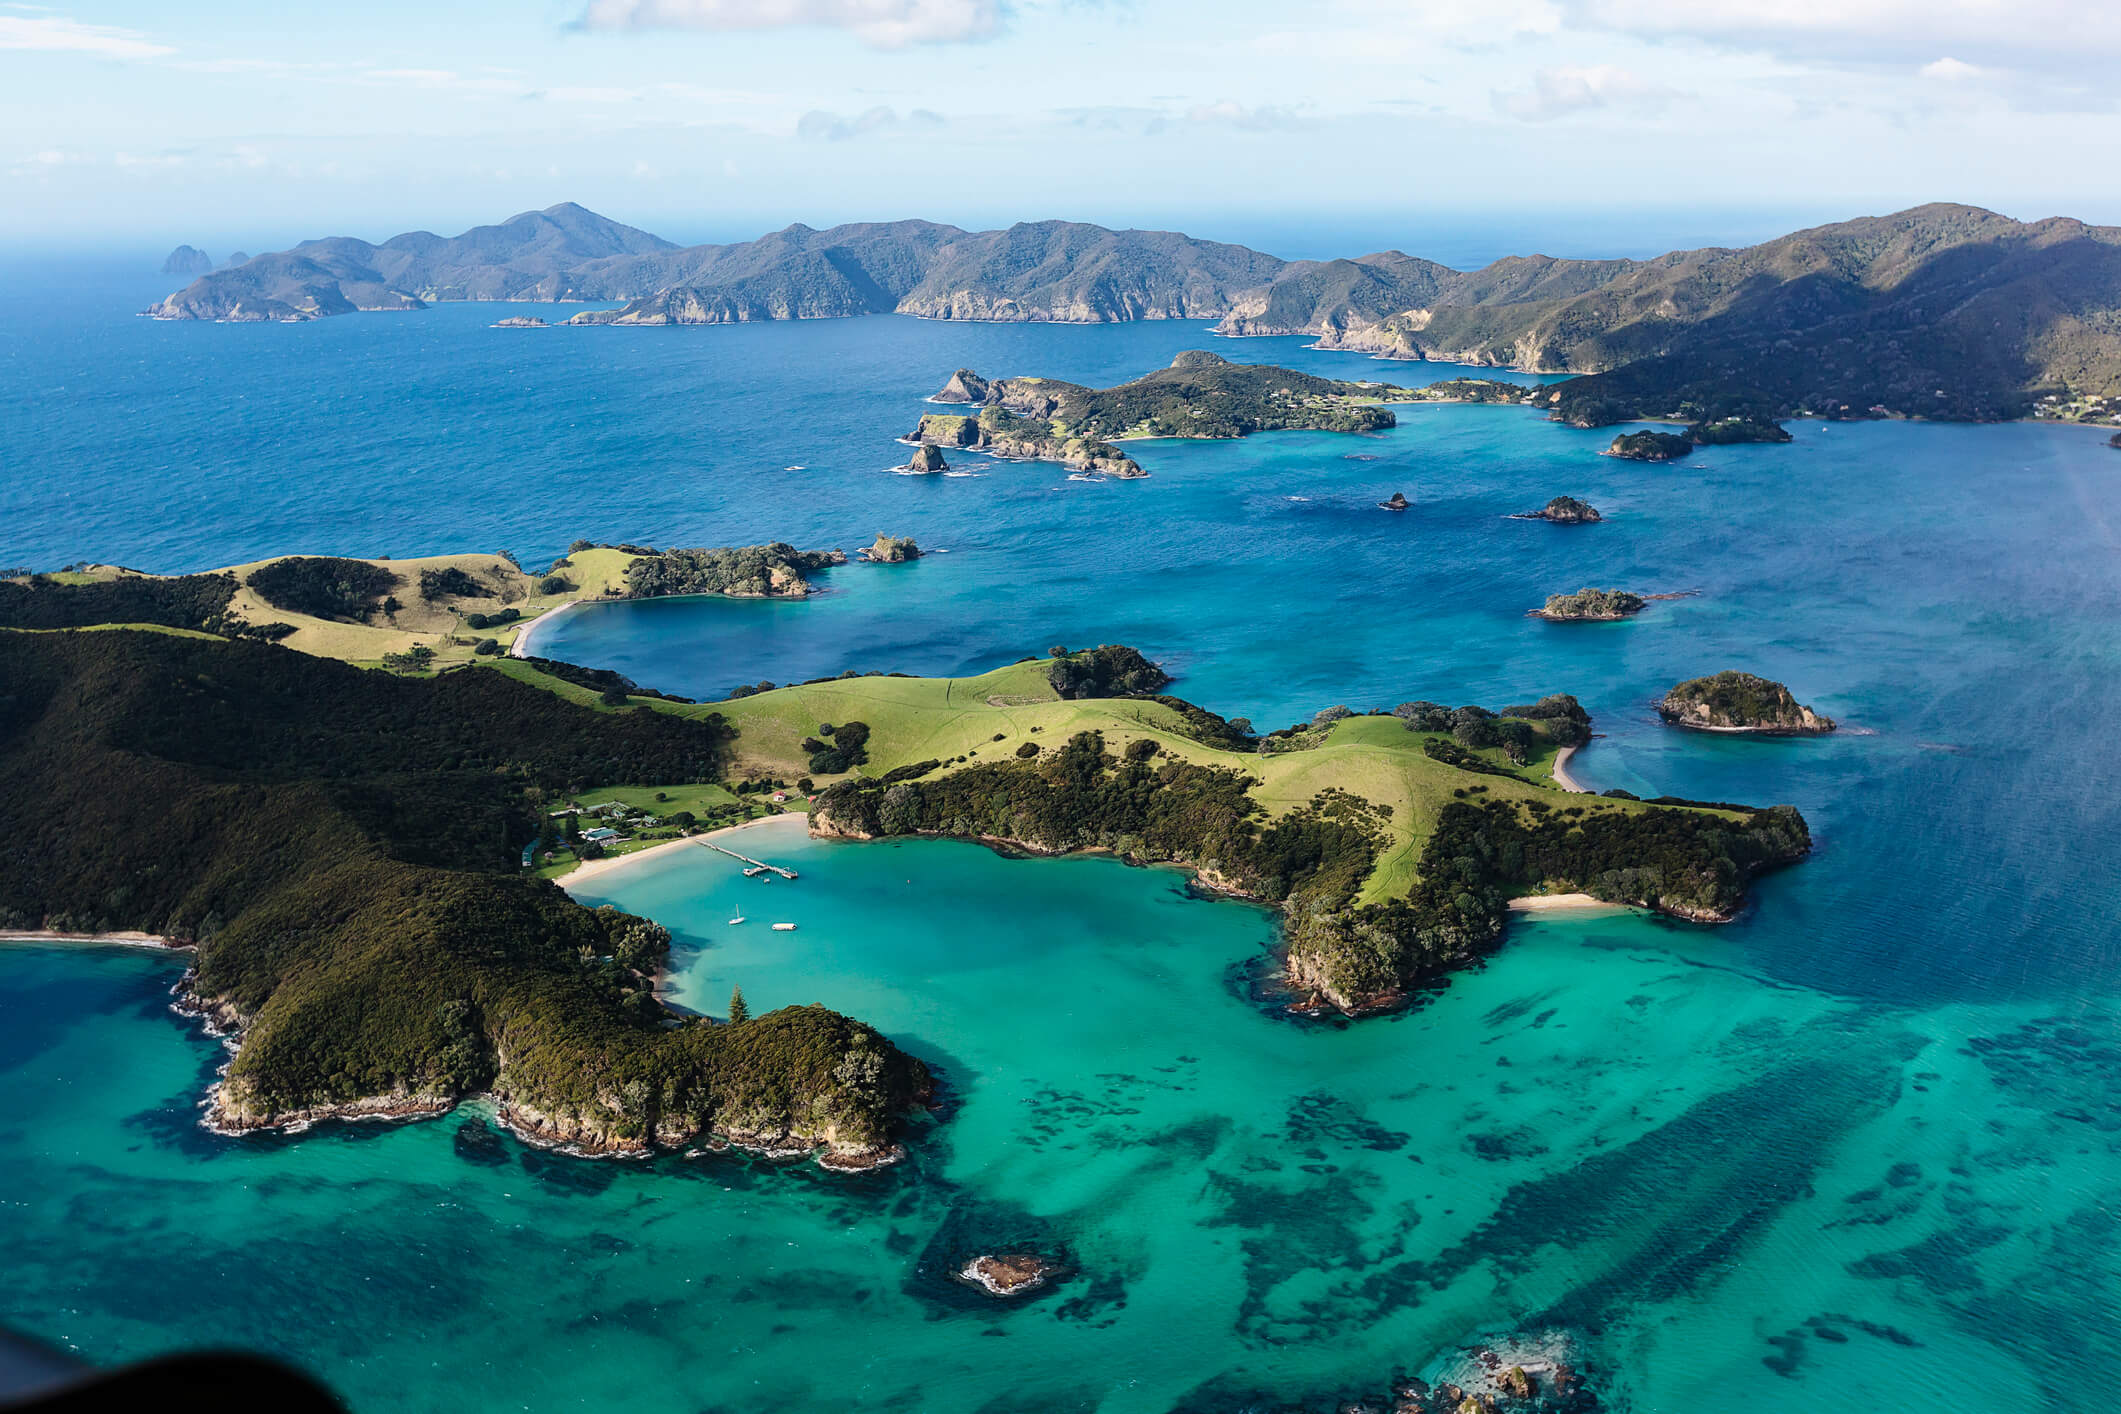 view of the Bay of Islands, North Island, New Zealand